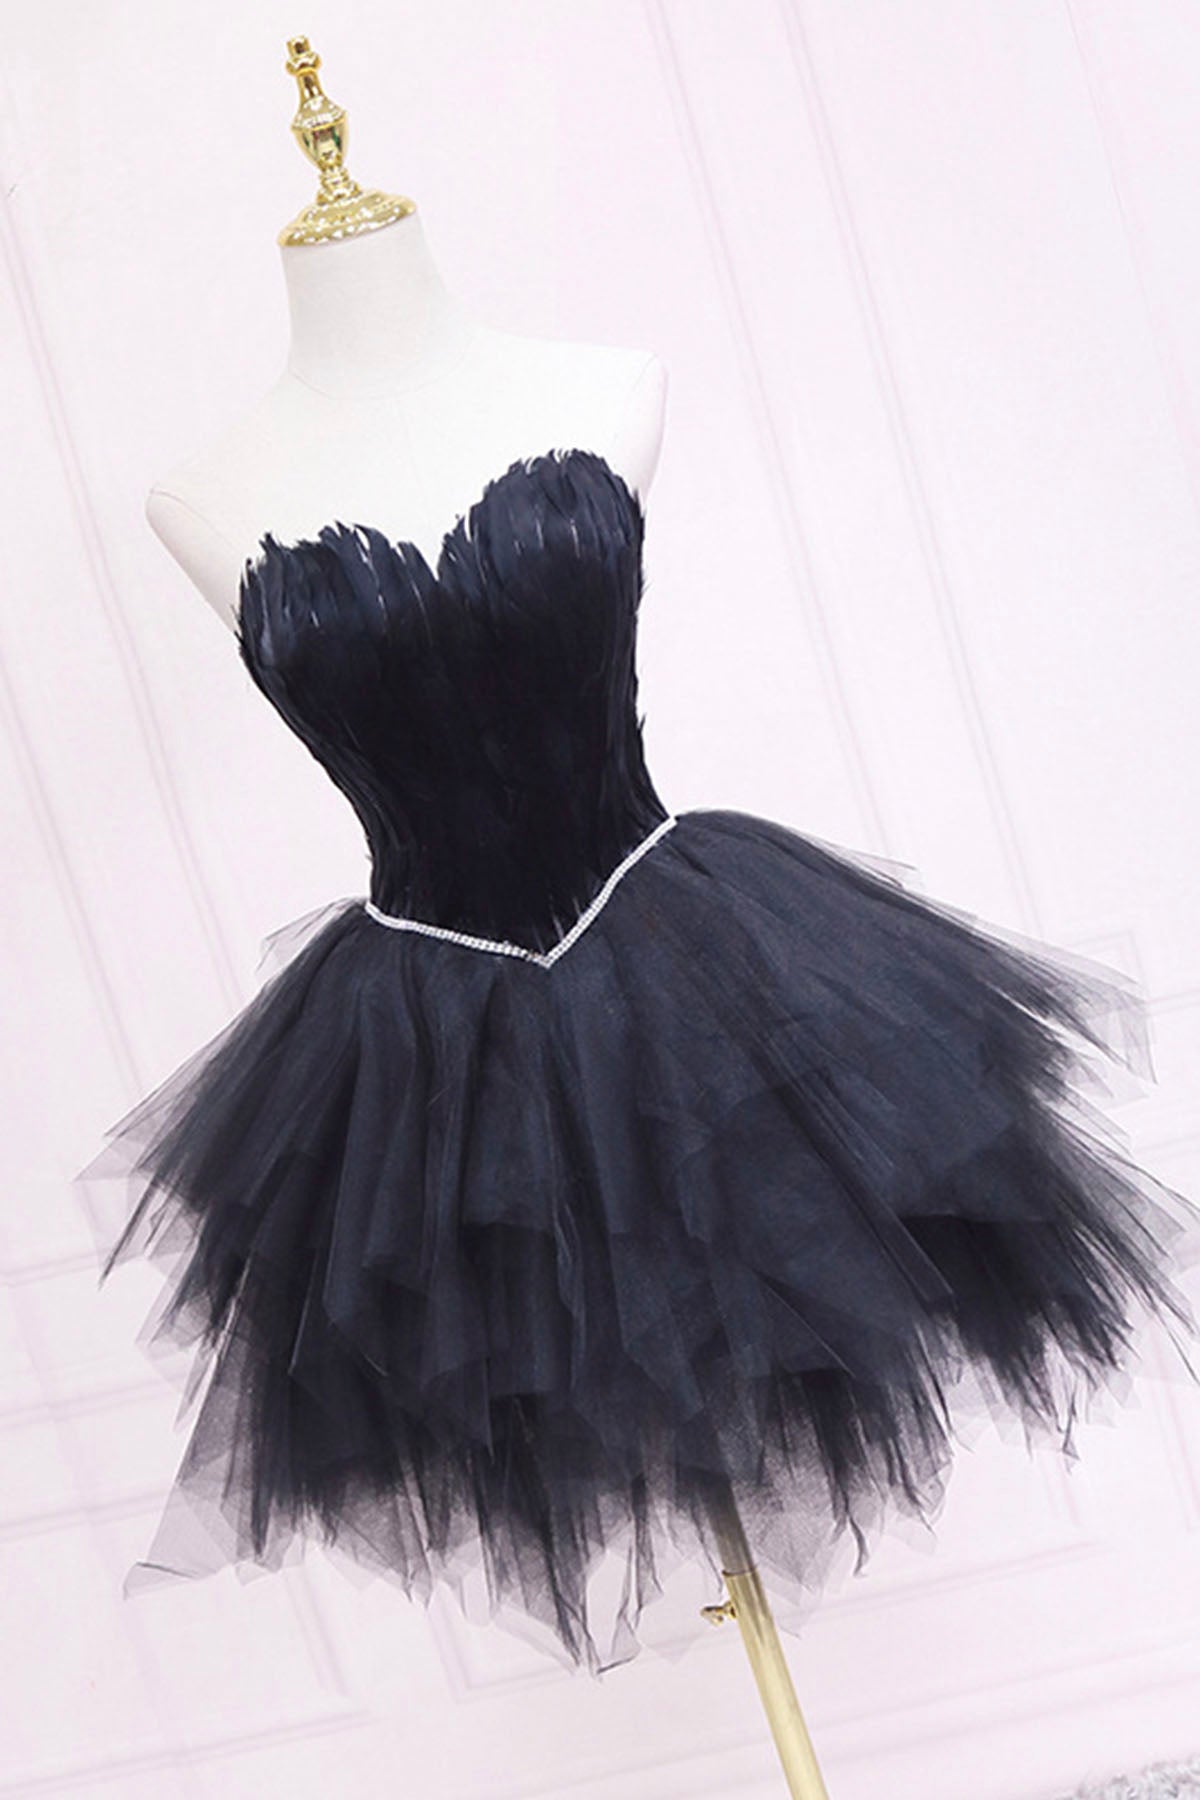 Party Dresses Formal, Black Tulle Short Prom Dress with Feather, A-Line Sweetheart Neckline Party Dress